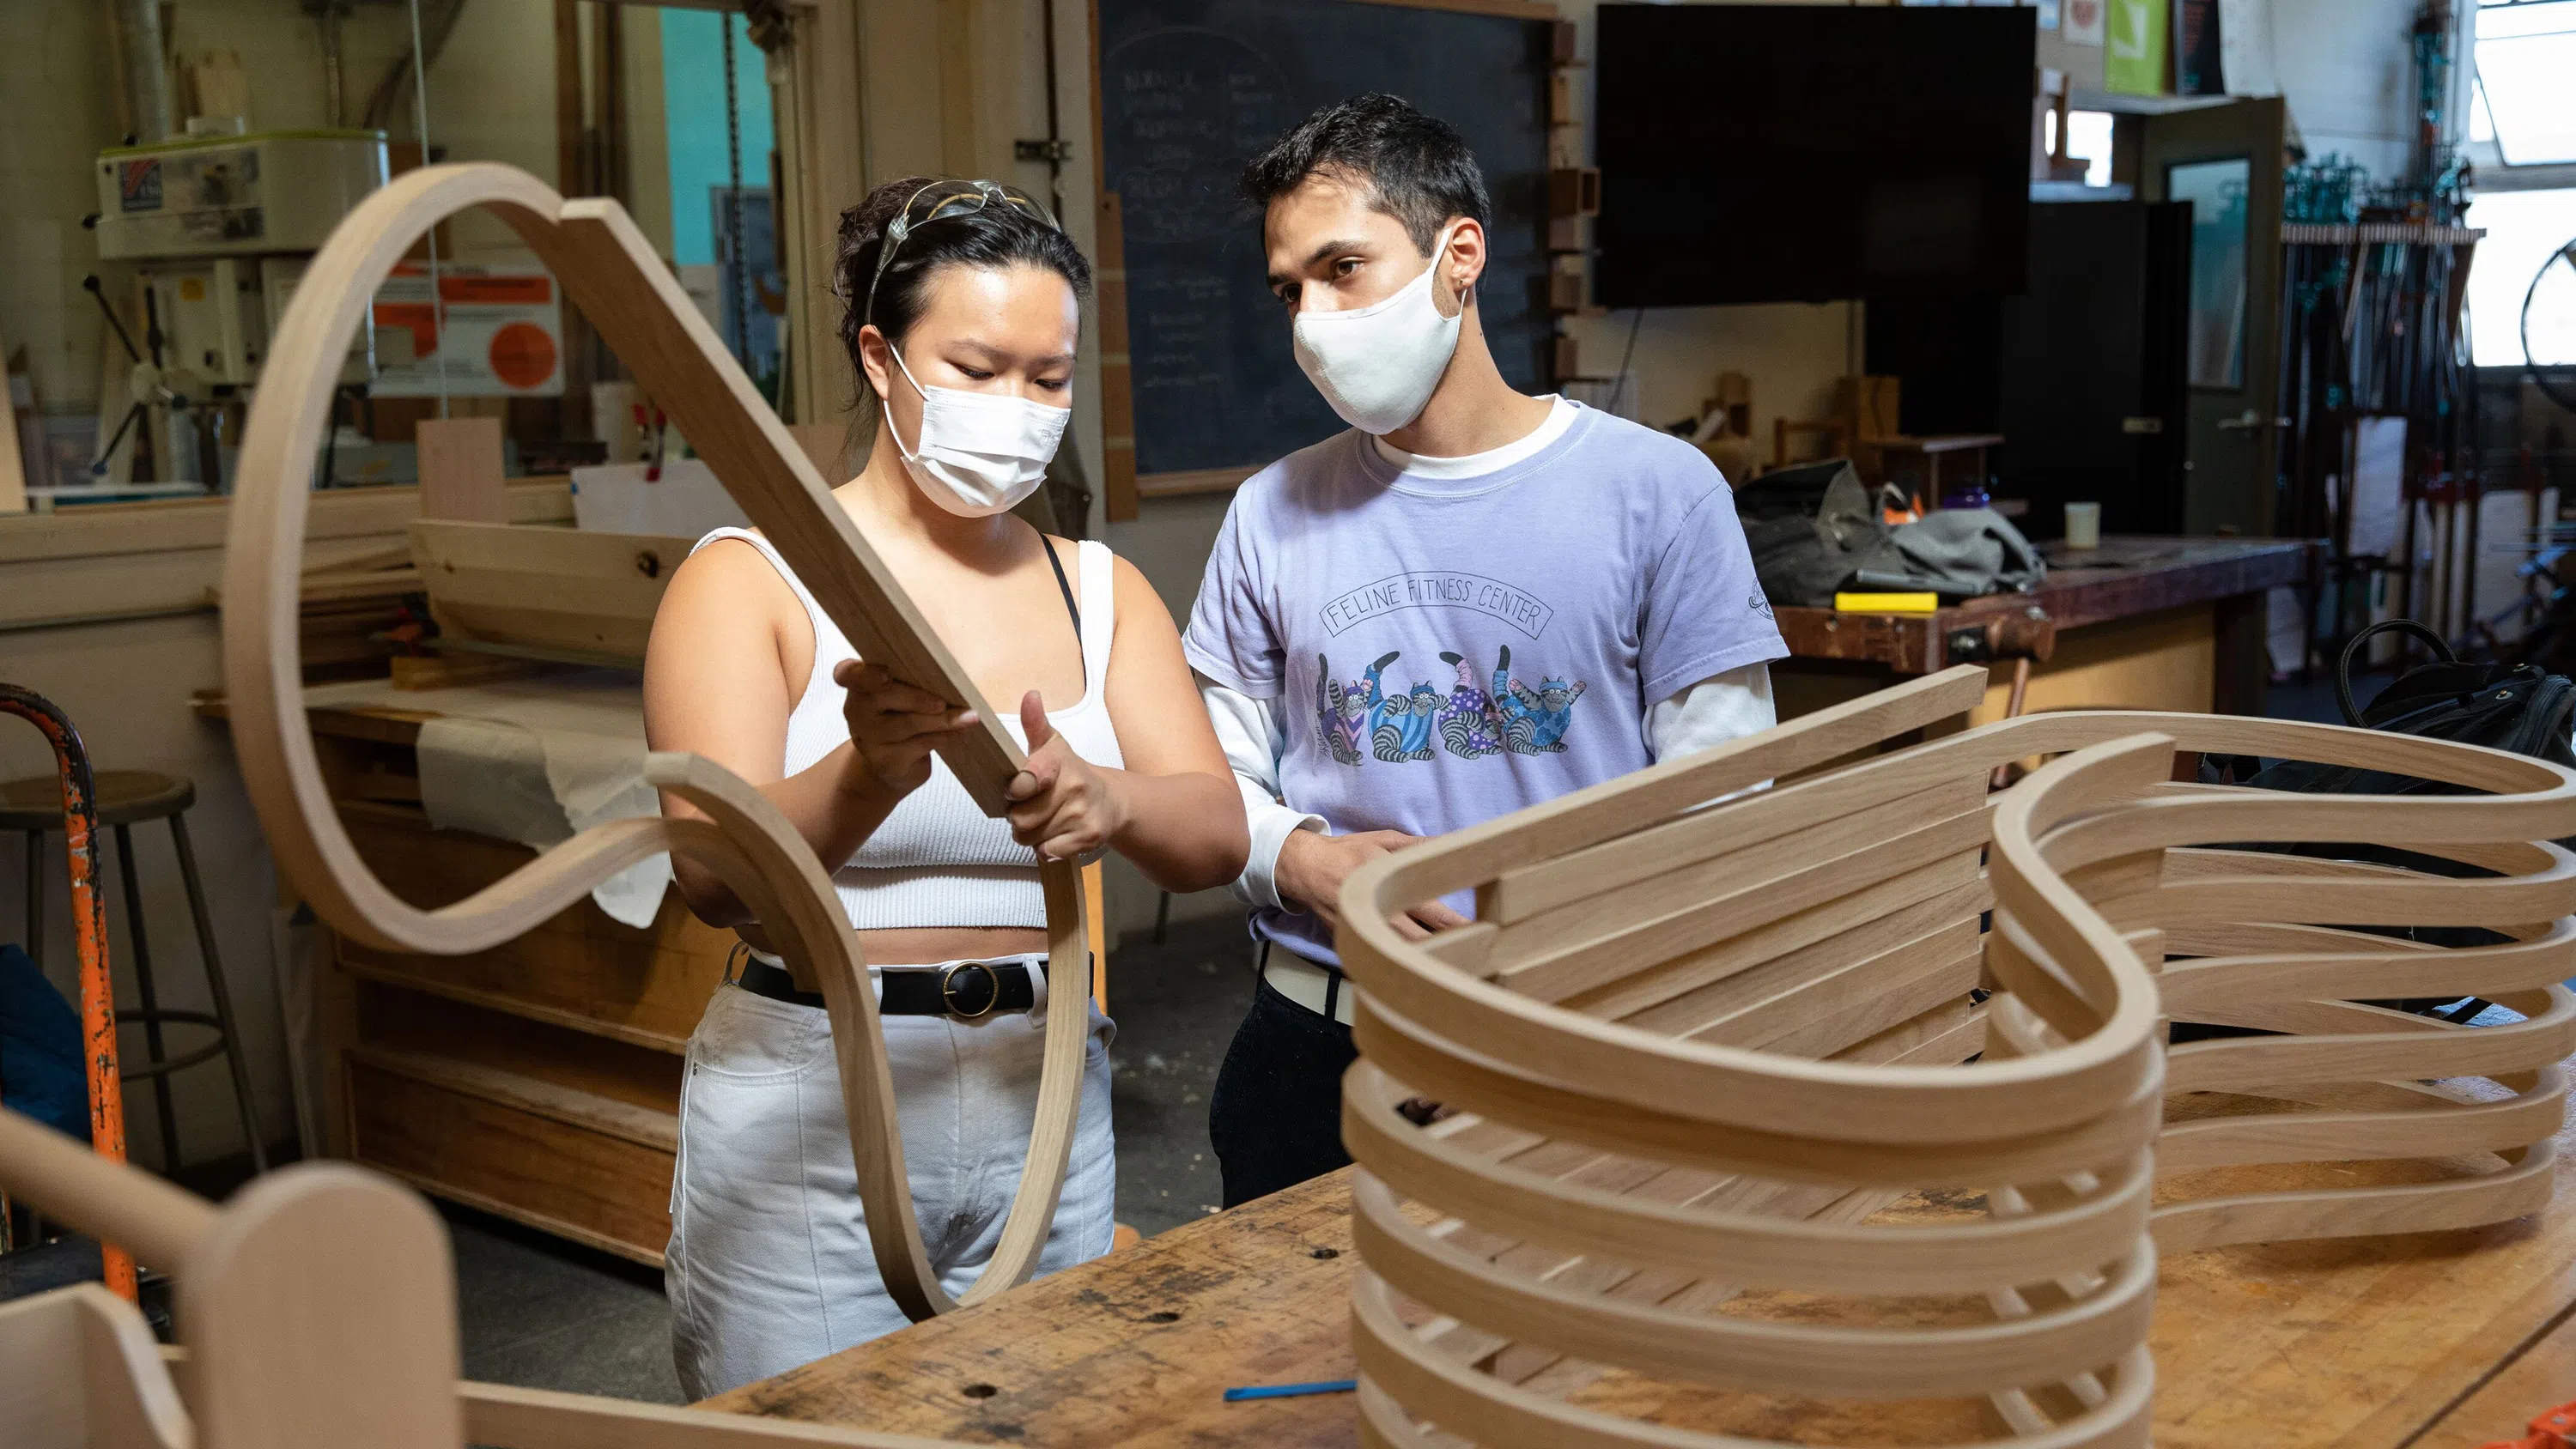 A student shows a curved wood structure to a fellow student.